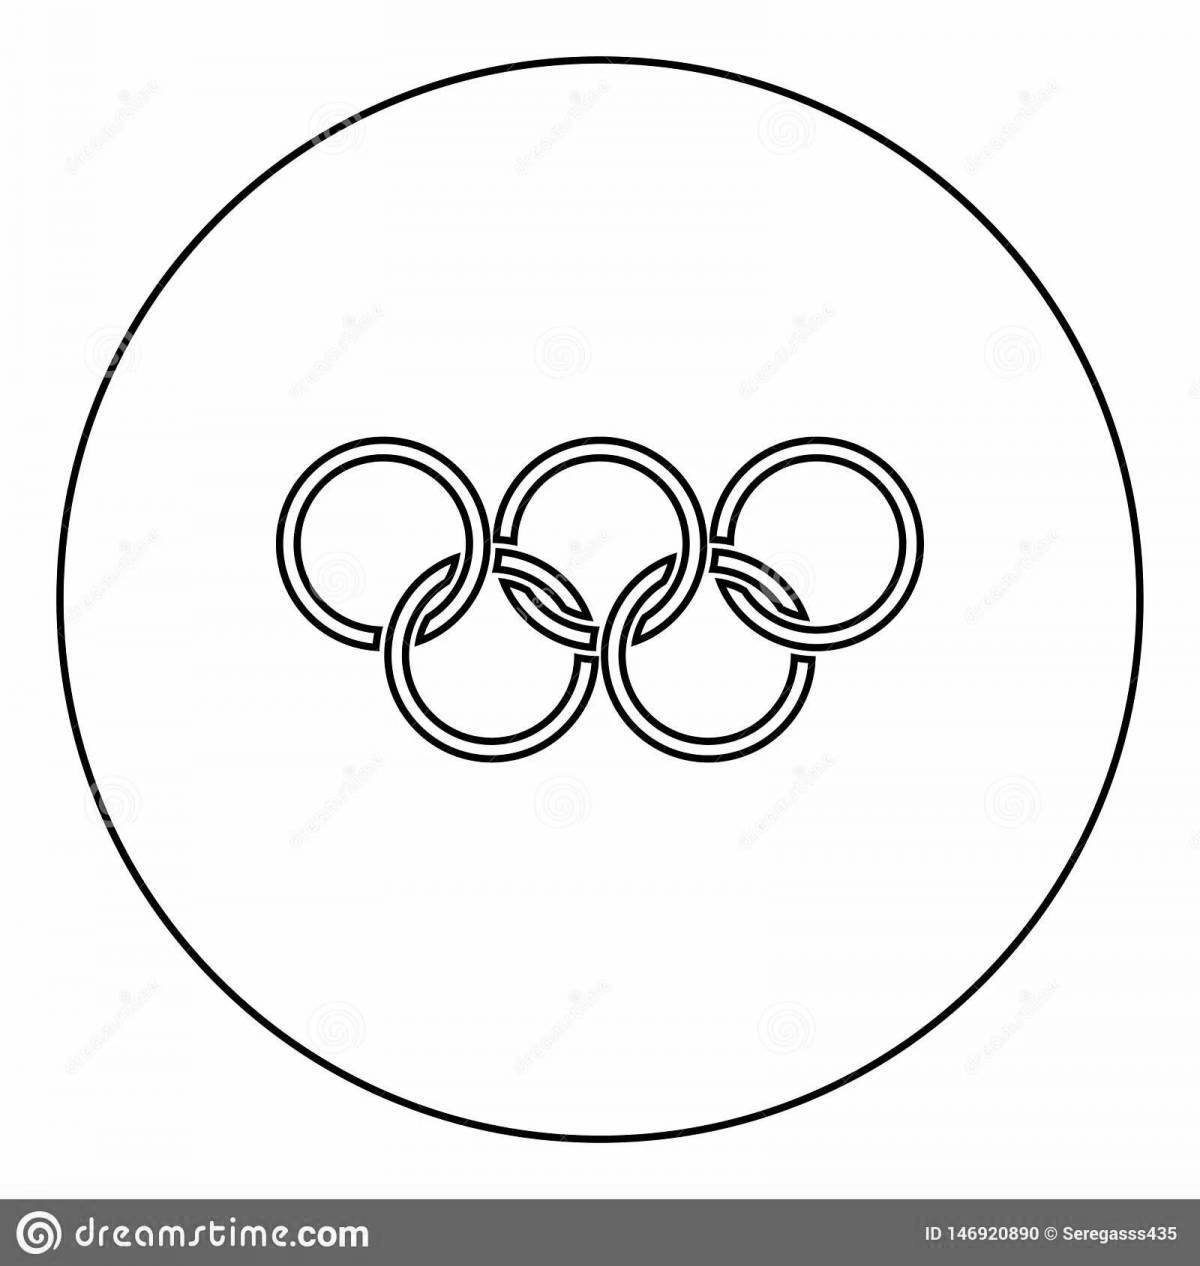 Coloring page exciting olympic rings